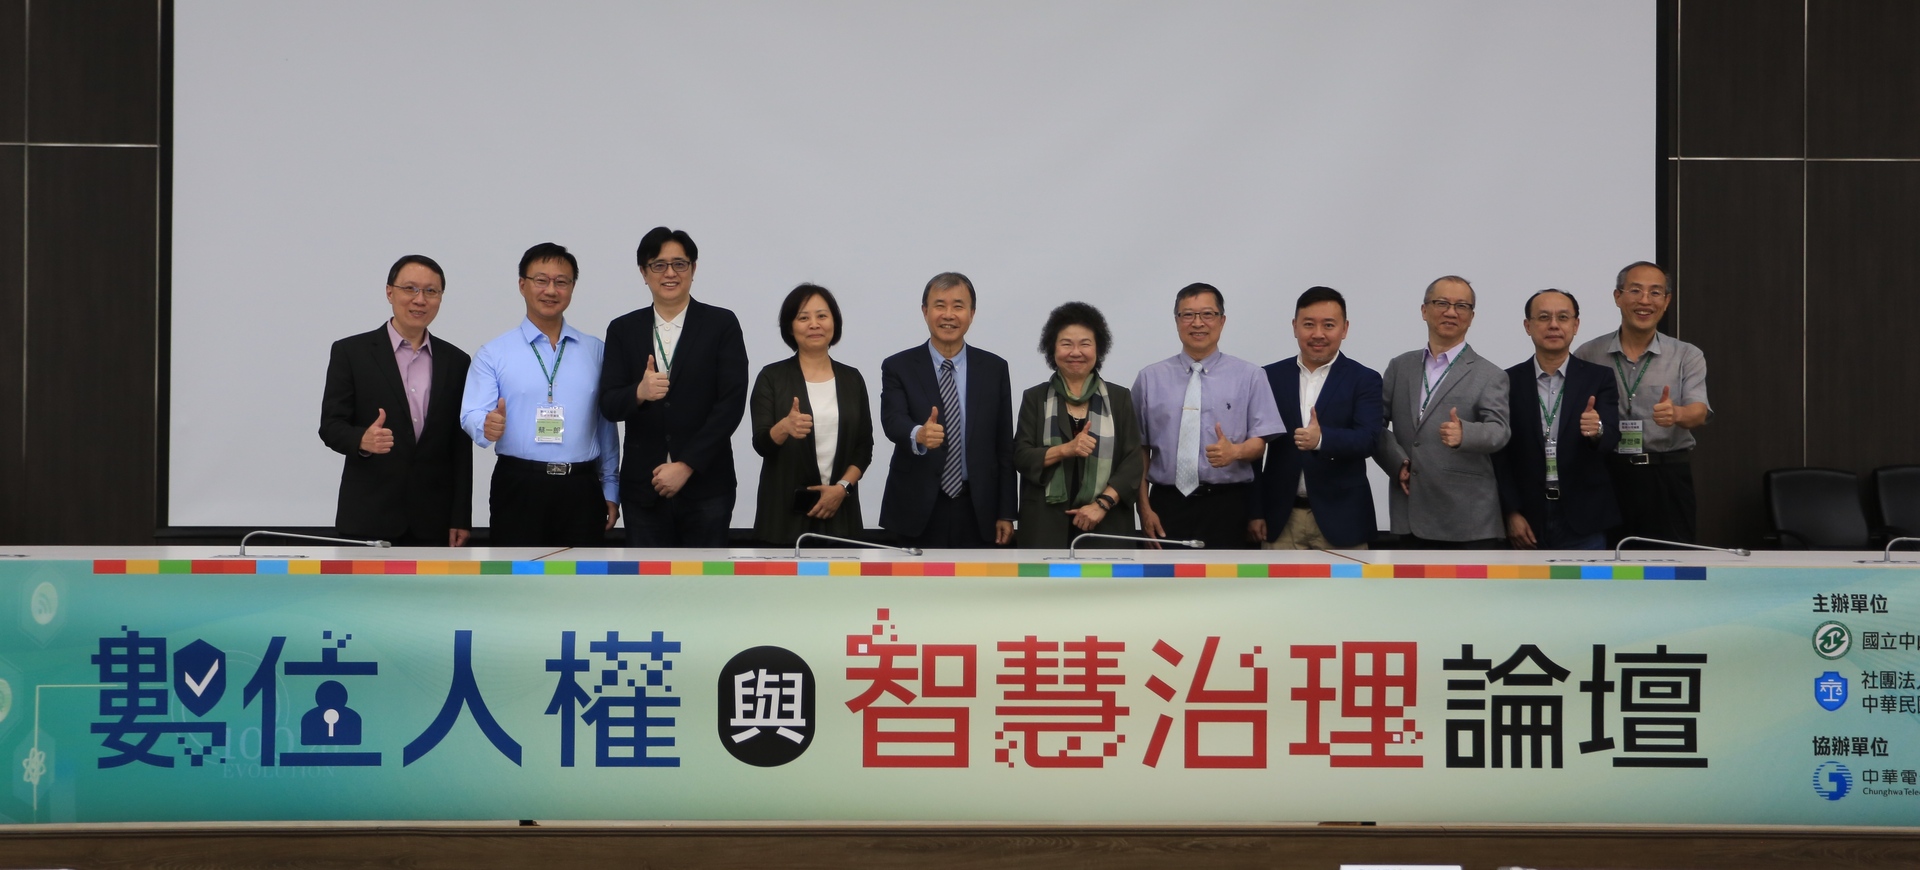 Institute of Public Affairs Management at National Sun Yat-sen University (NSYSU) cohosted the inaugural Digital Human Rights and AI Governance Forum in south Taiwan, collaborating with the Digital Financial Trade and Data Protection Association.